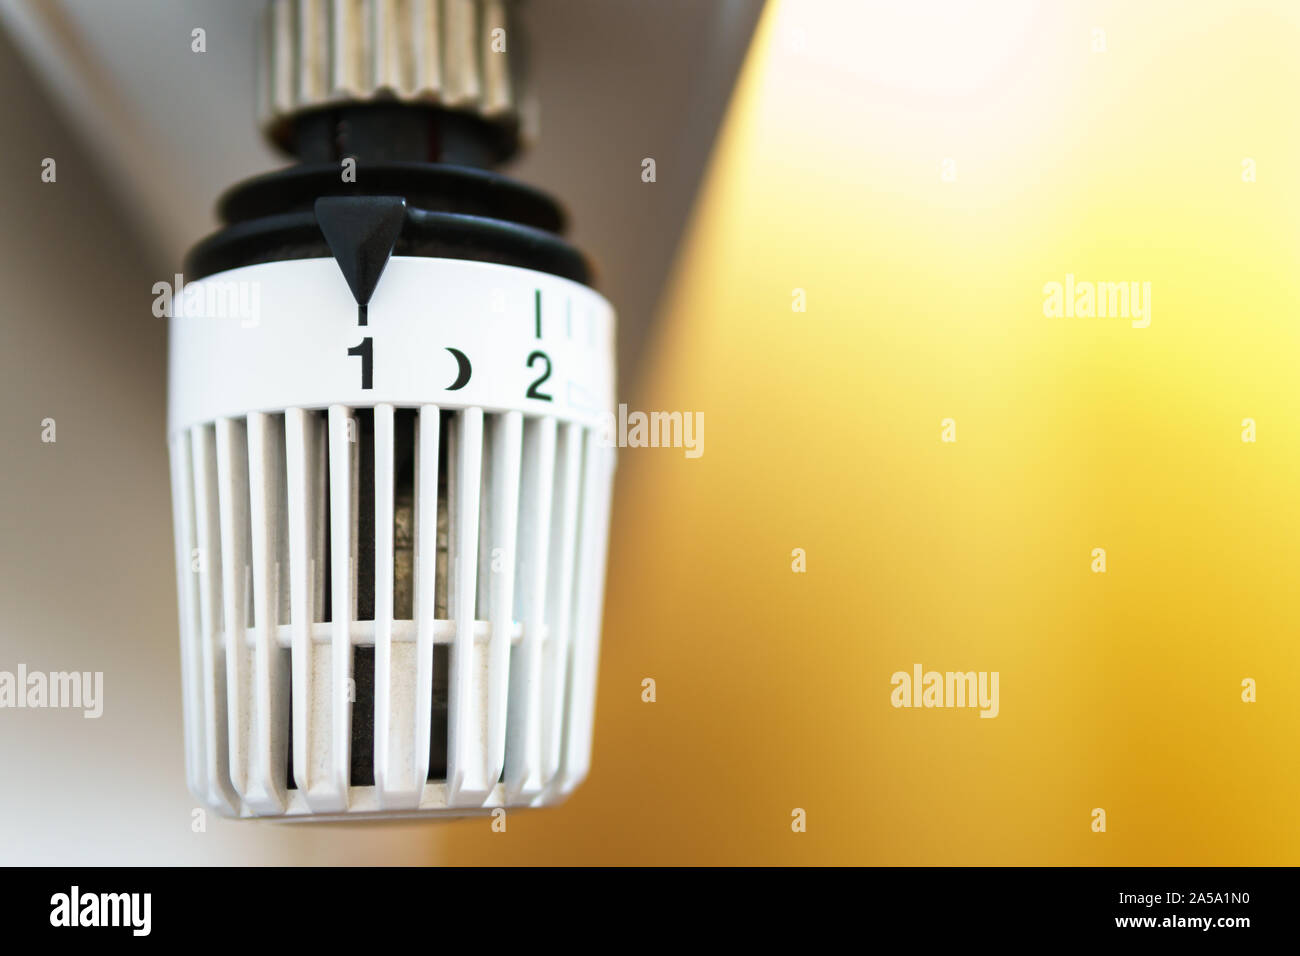 Heater thermostat valve set down to number one icon, symbol for saving money at heating costs or low temperature setting, closeup, horizontal format, Stock Photo